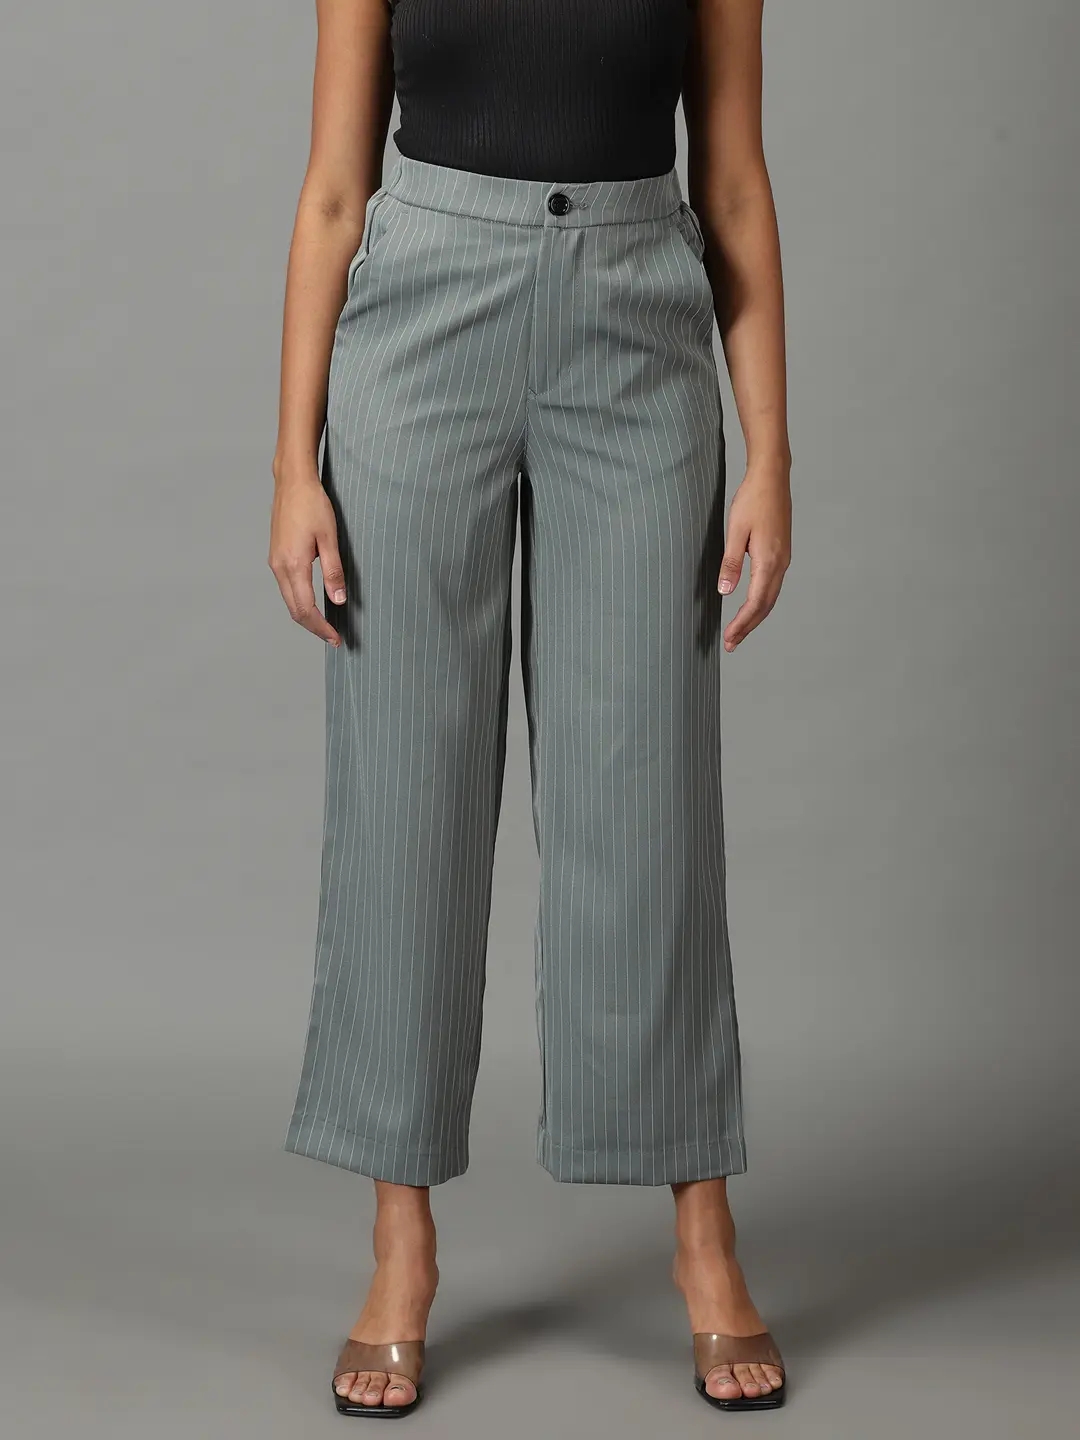 Buy DOROTHY PERKINS Women White  Grey Regular Fit Striped Cropped Trousers   Trousers for Women 6398522  Myntra